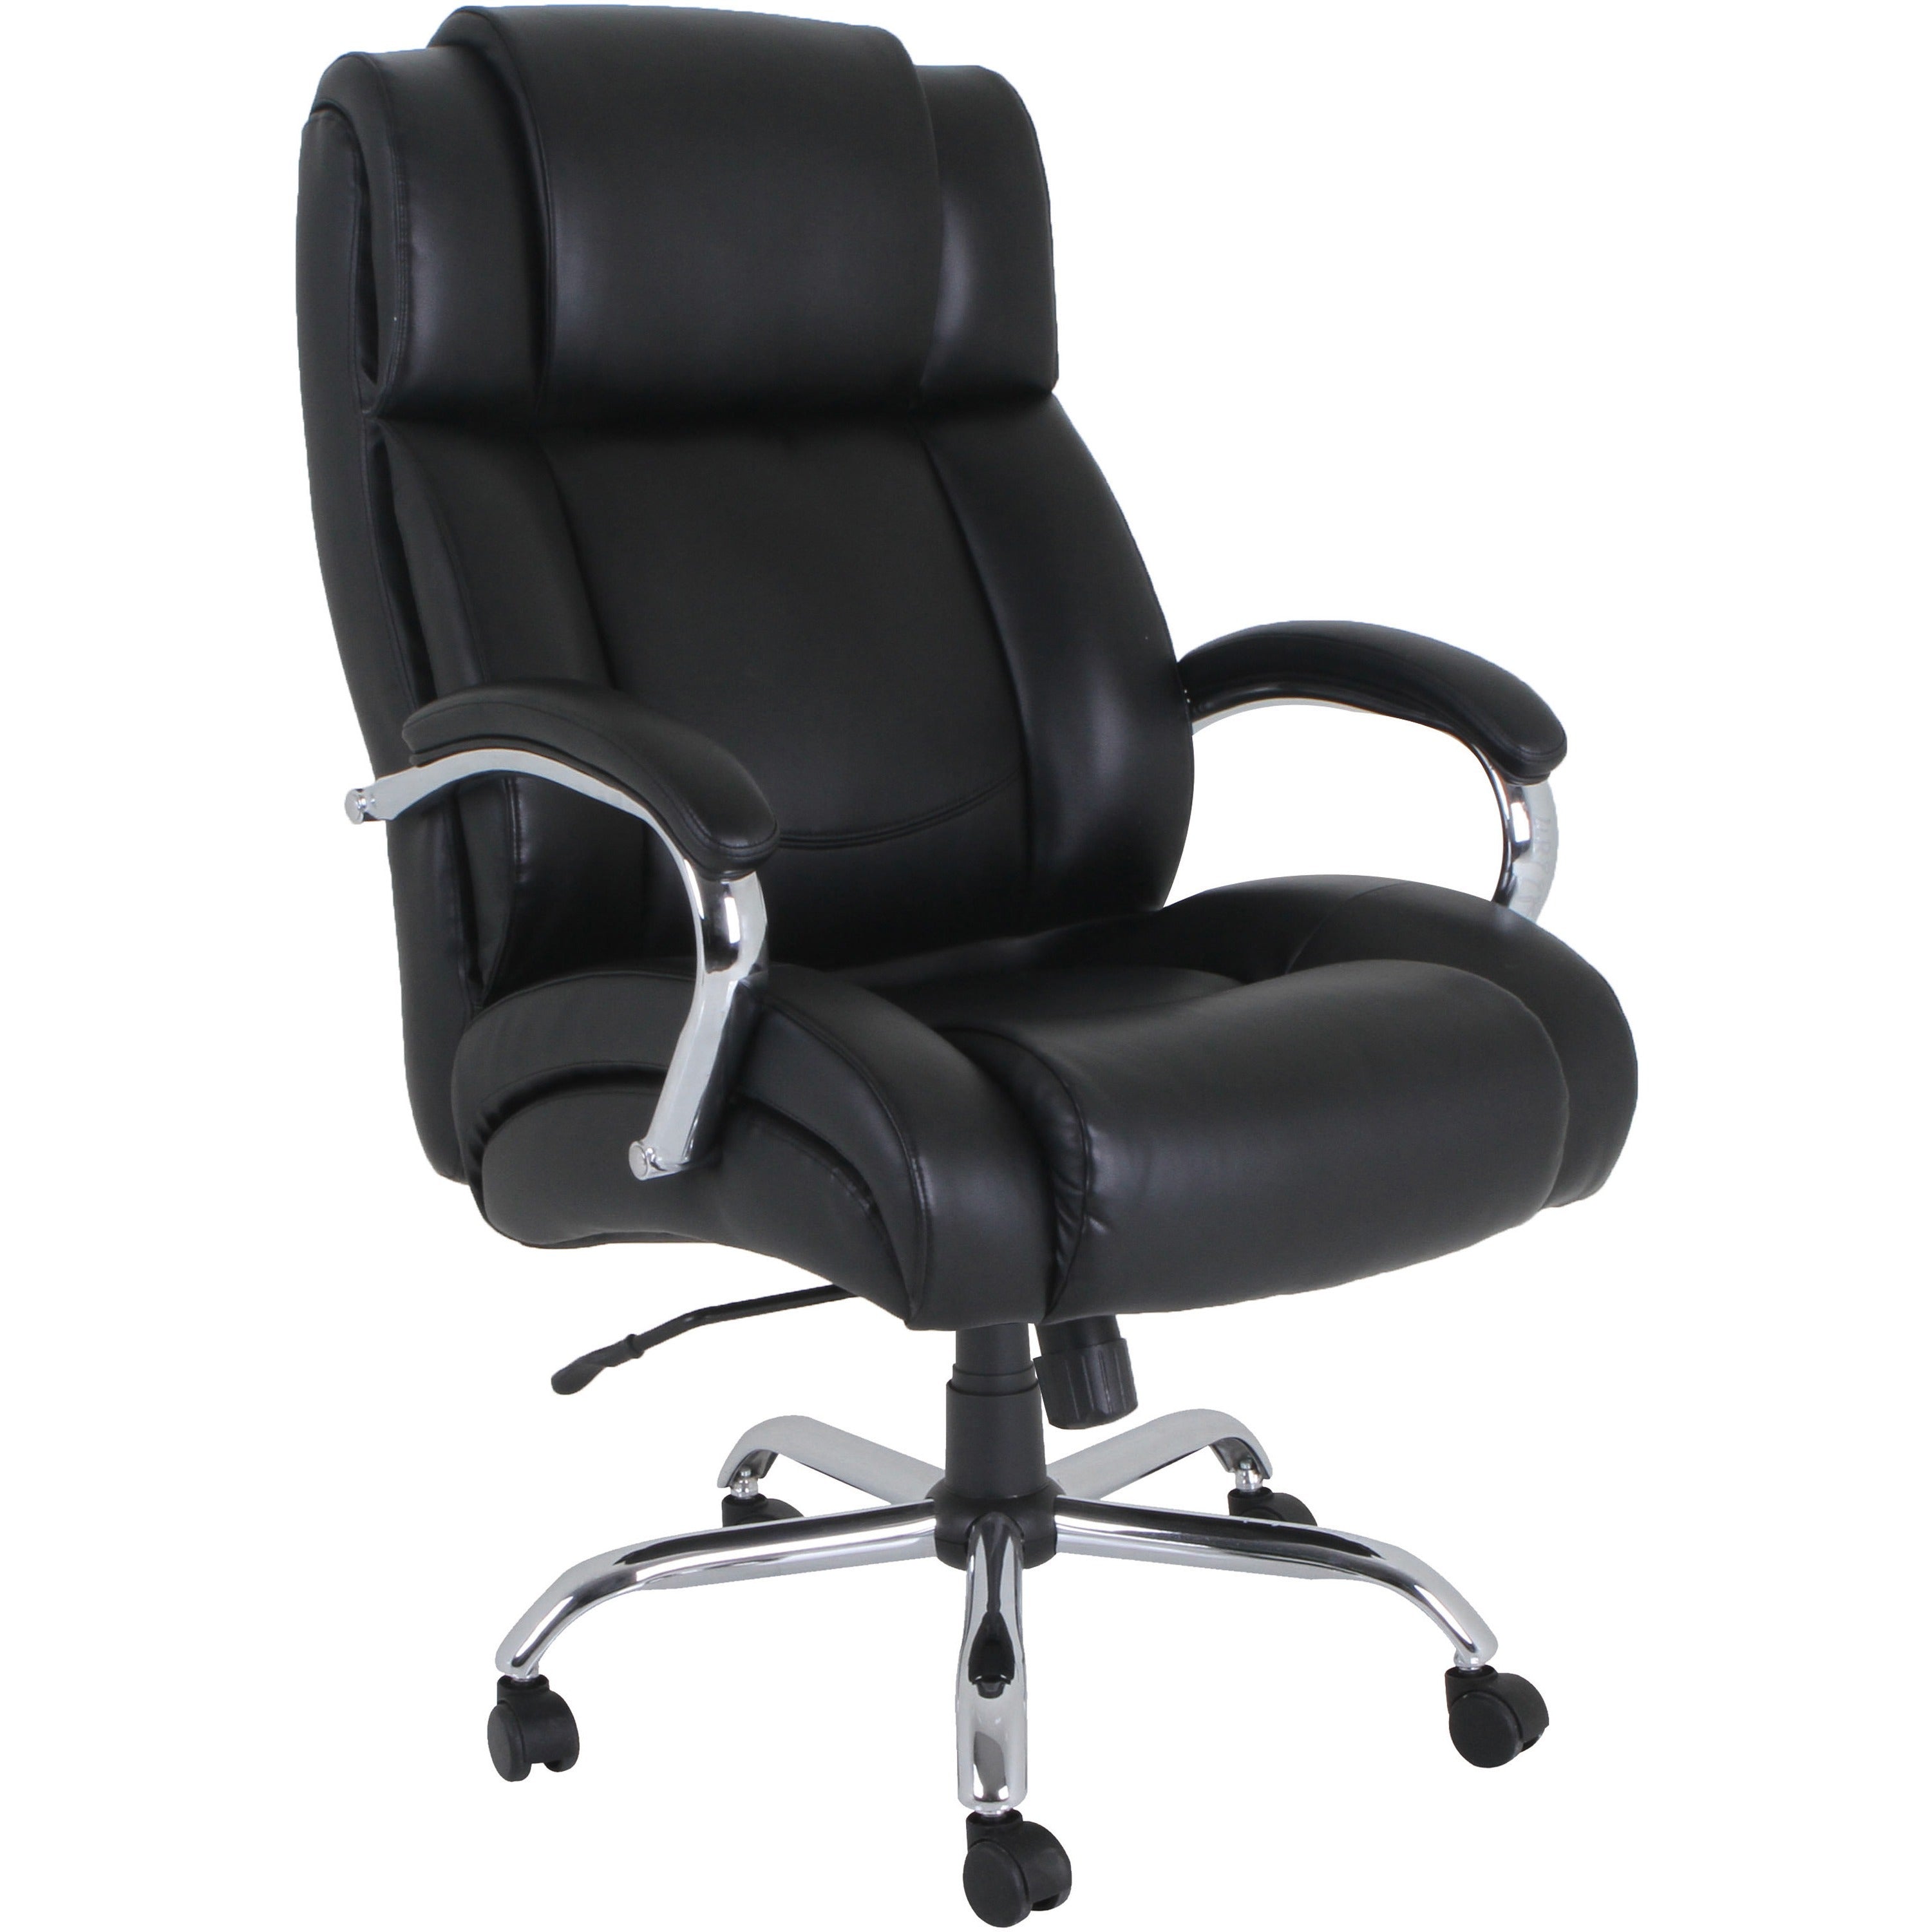 lorell-big-&-tall-chair-with-ultracoil-comfort-black-1-each_llr99845 - 1